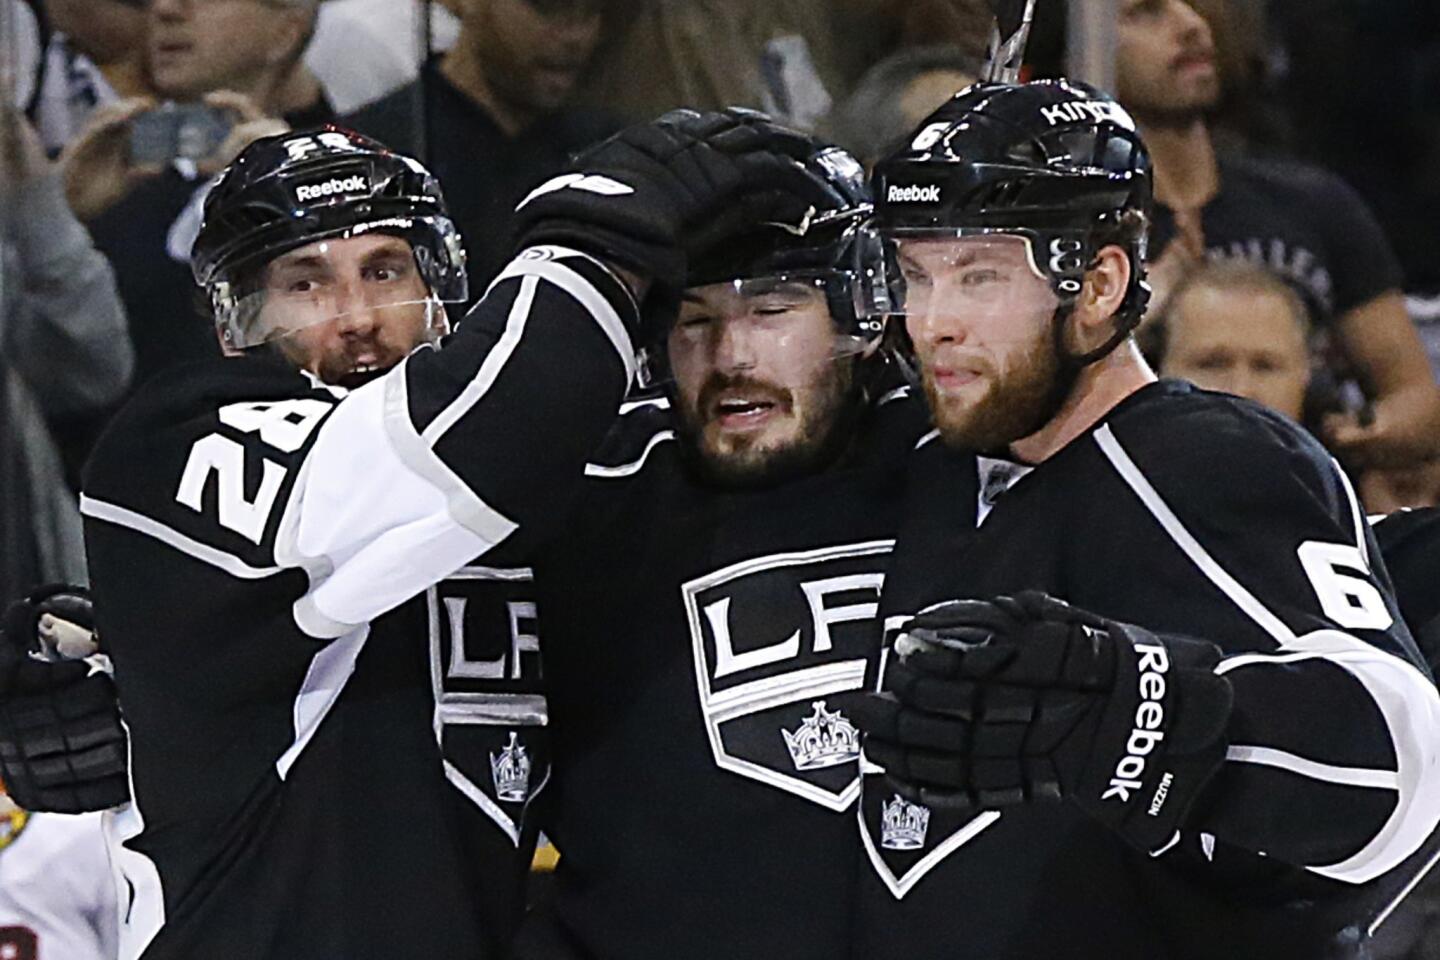 Kings defenseman Drew Doughty, center, is congratulated by teammates Jarret Stoll, left, and Jake Muzzin after scoring in the third period of the Kings' 4-3 win over the Chicago Blackhawks in Game 3 of the Western Conference finals at Staples Center.